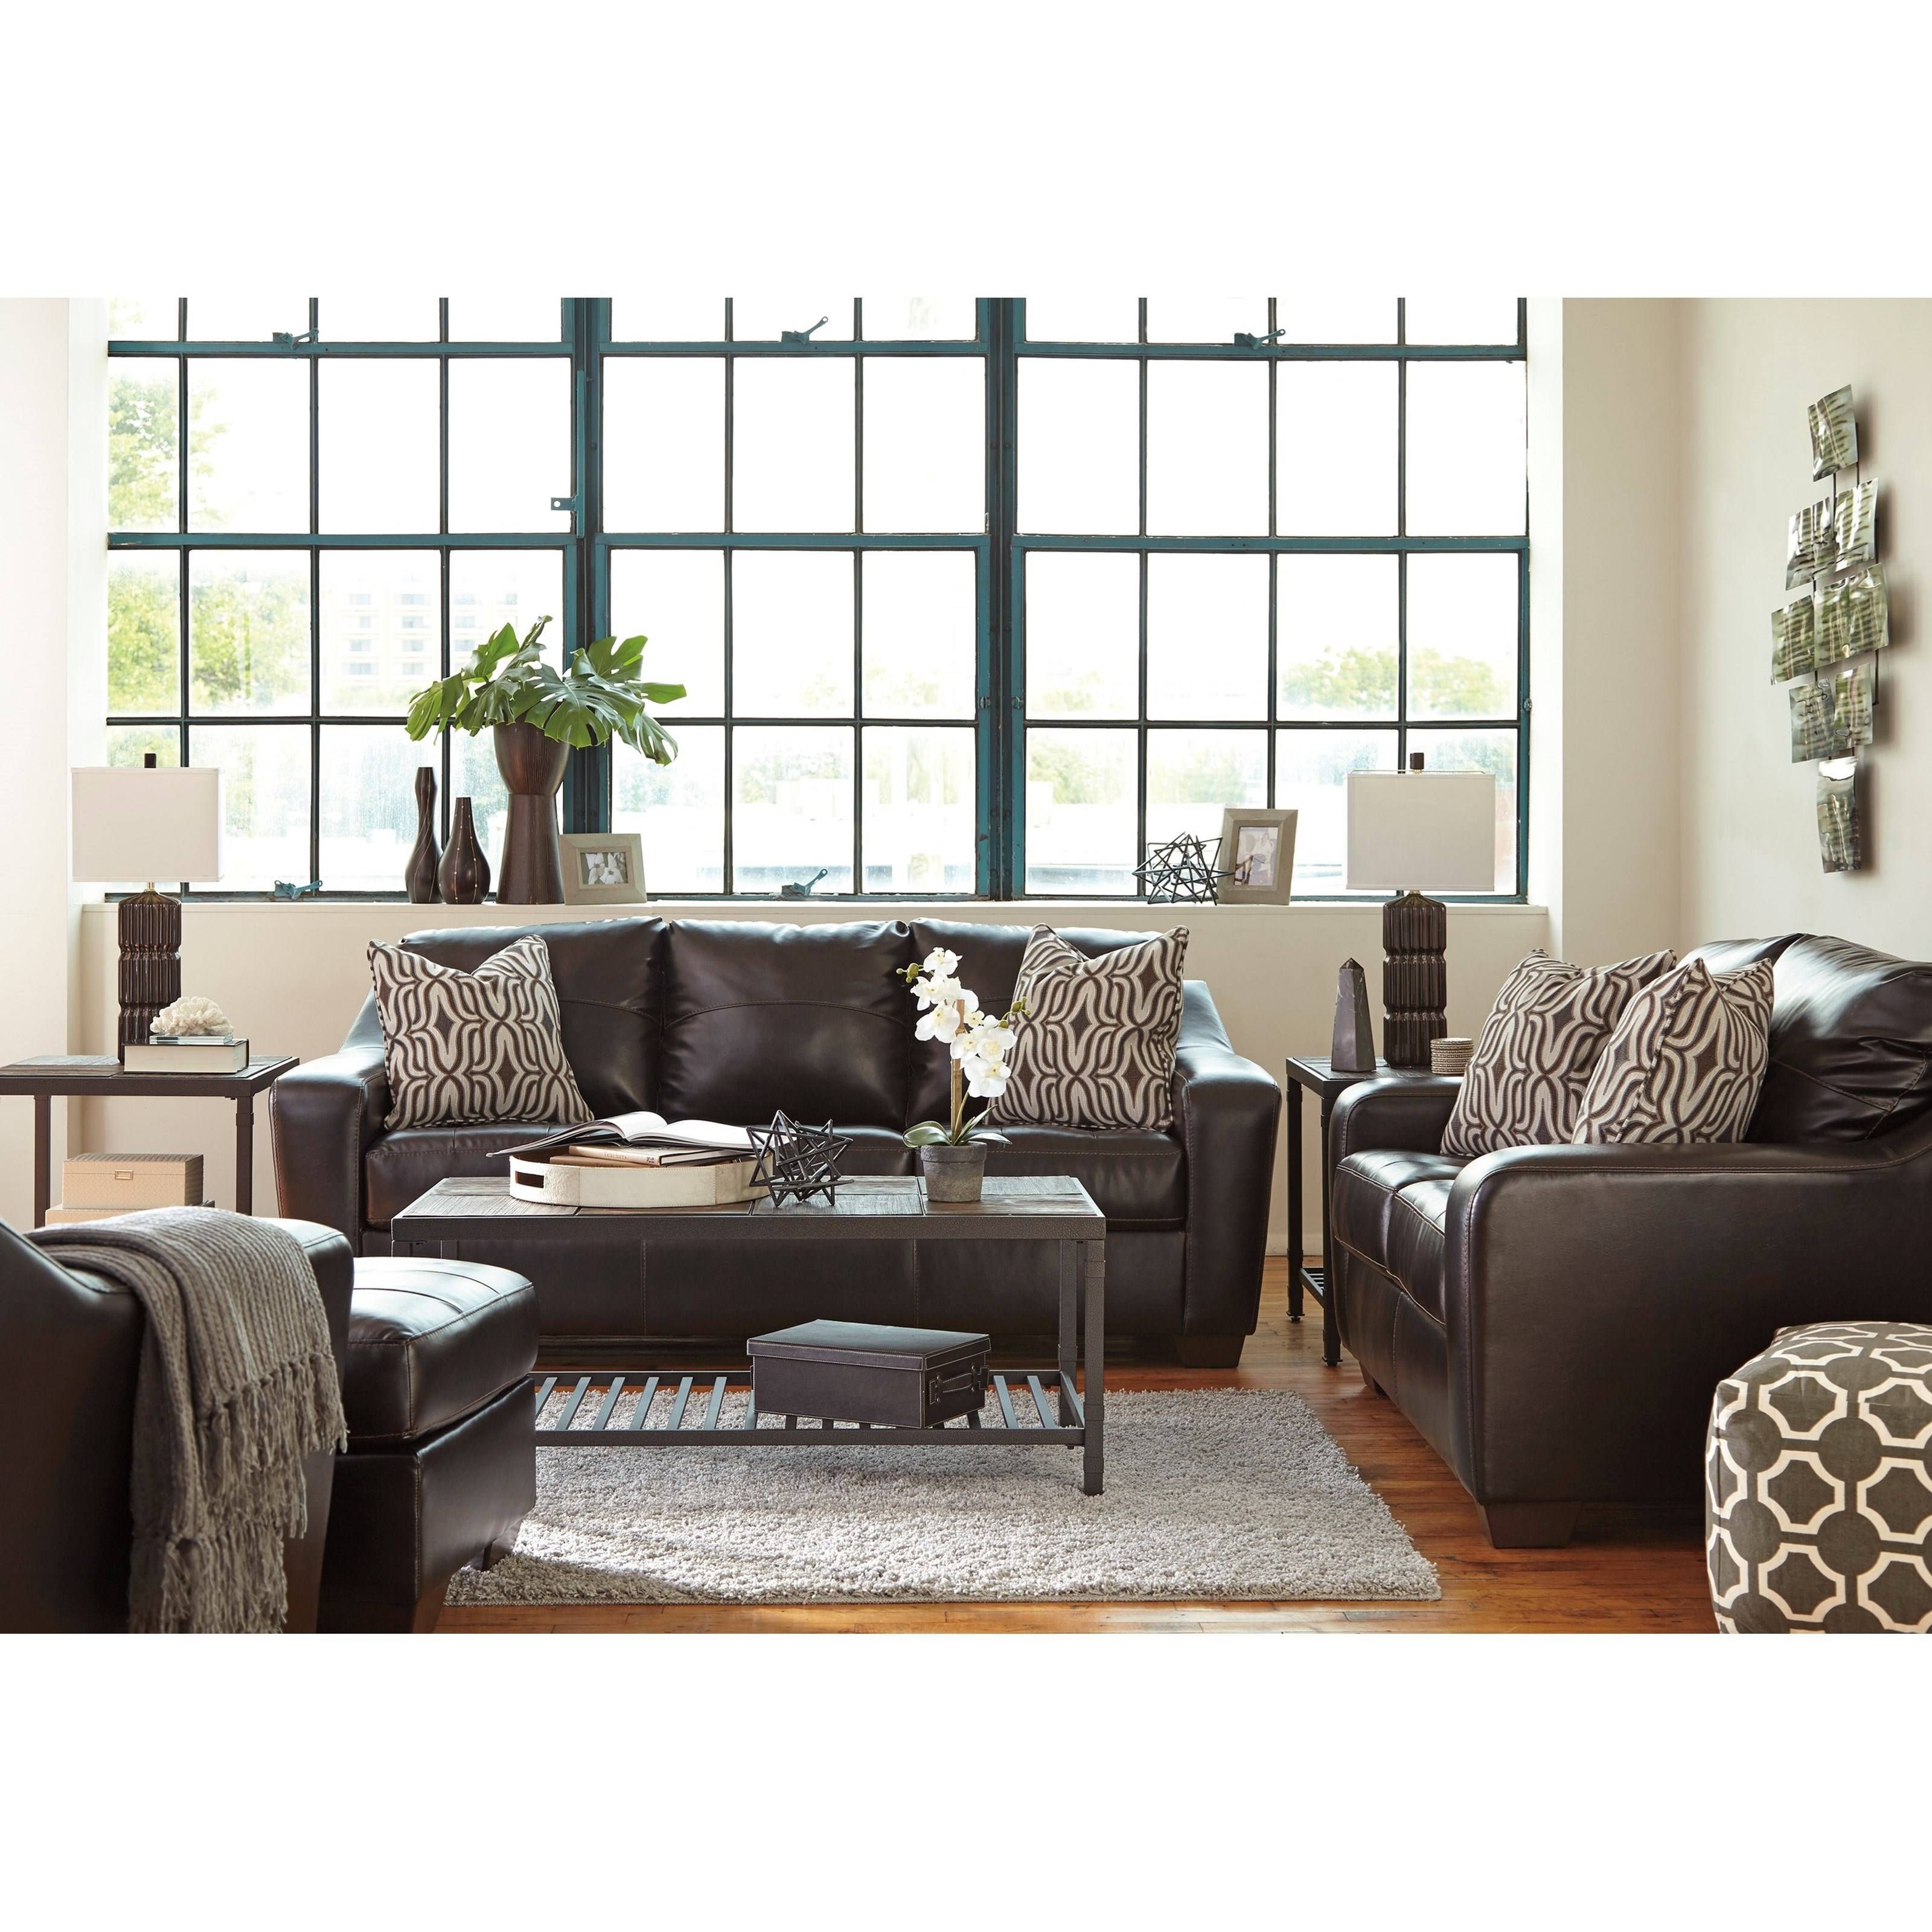 Contemporary Faux Leather Sofa With Tufted Seat Cushions Pertaining To Benchcraft Leather Sofas (View 12 of 15)